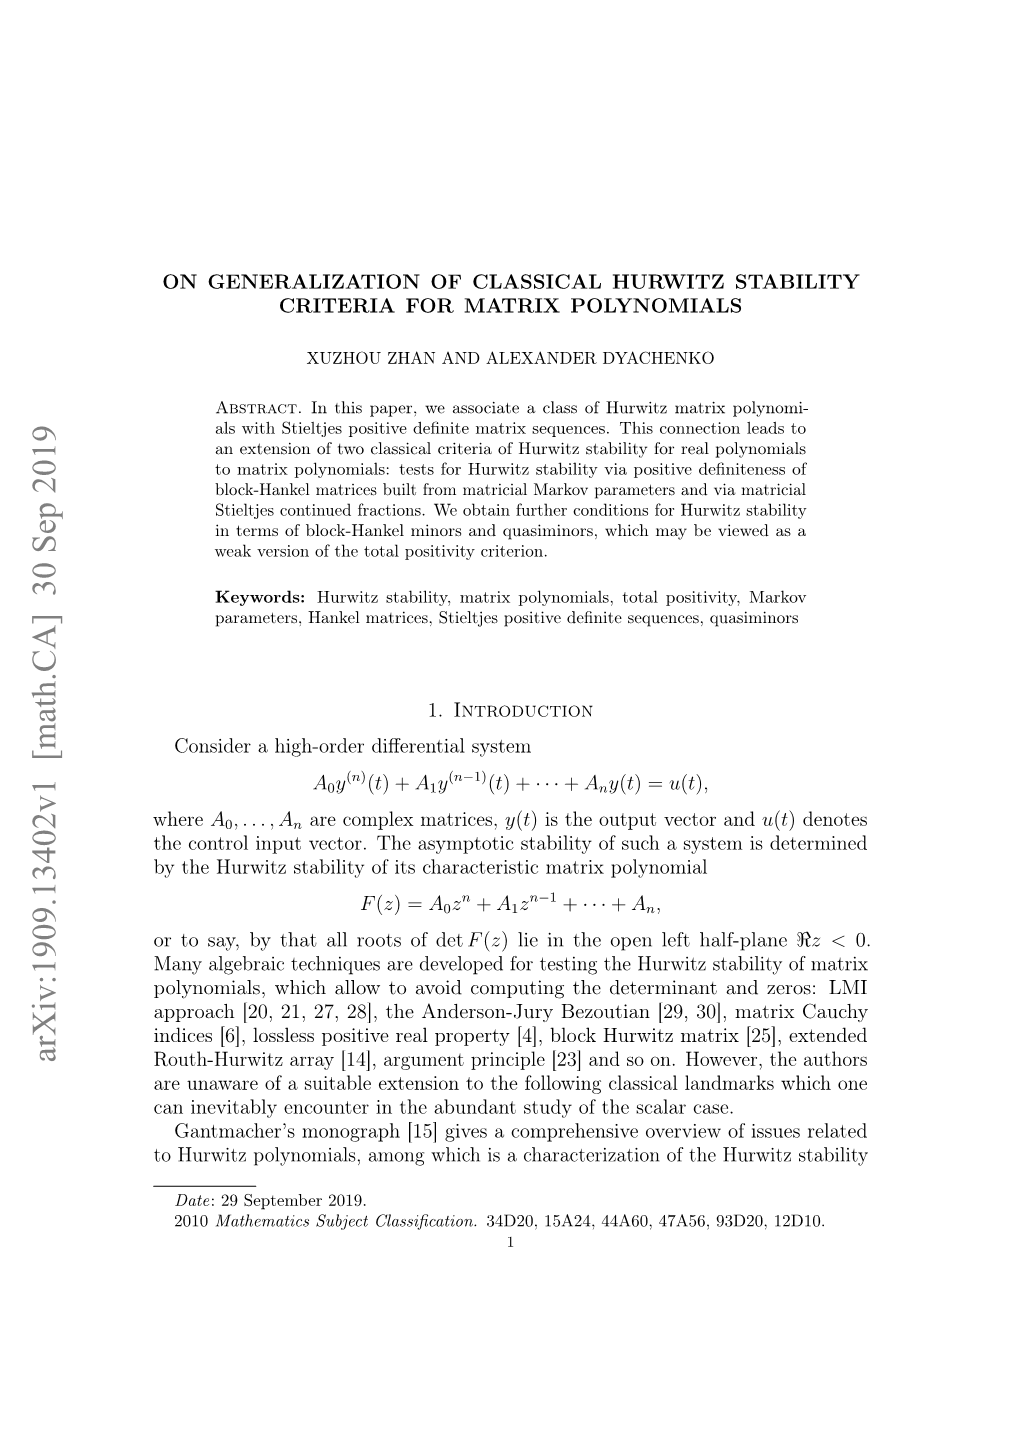 Arxiv:1909.13402V1 [Math.CA] 30 Sep 2019 Routh-Hurwitz Array [14], Argument Principle [23] and So On